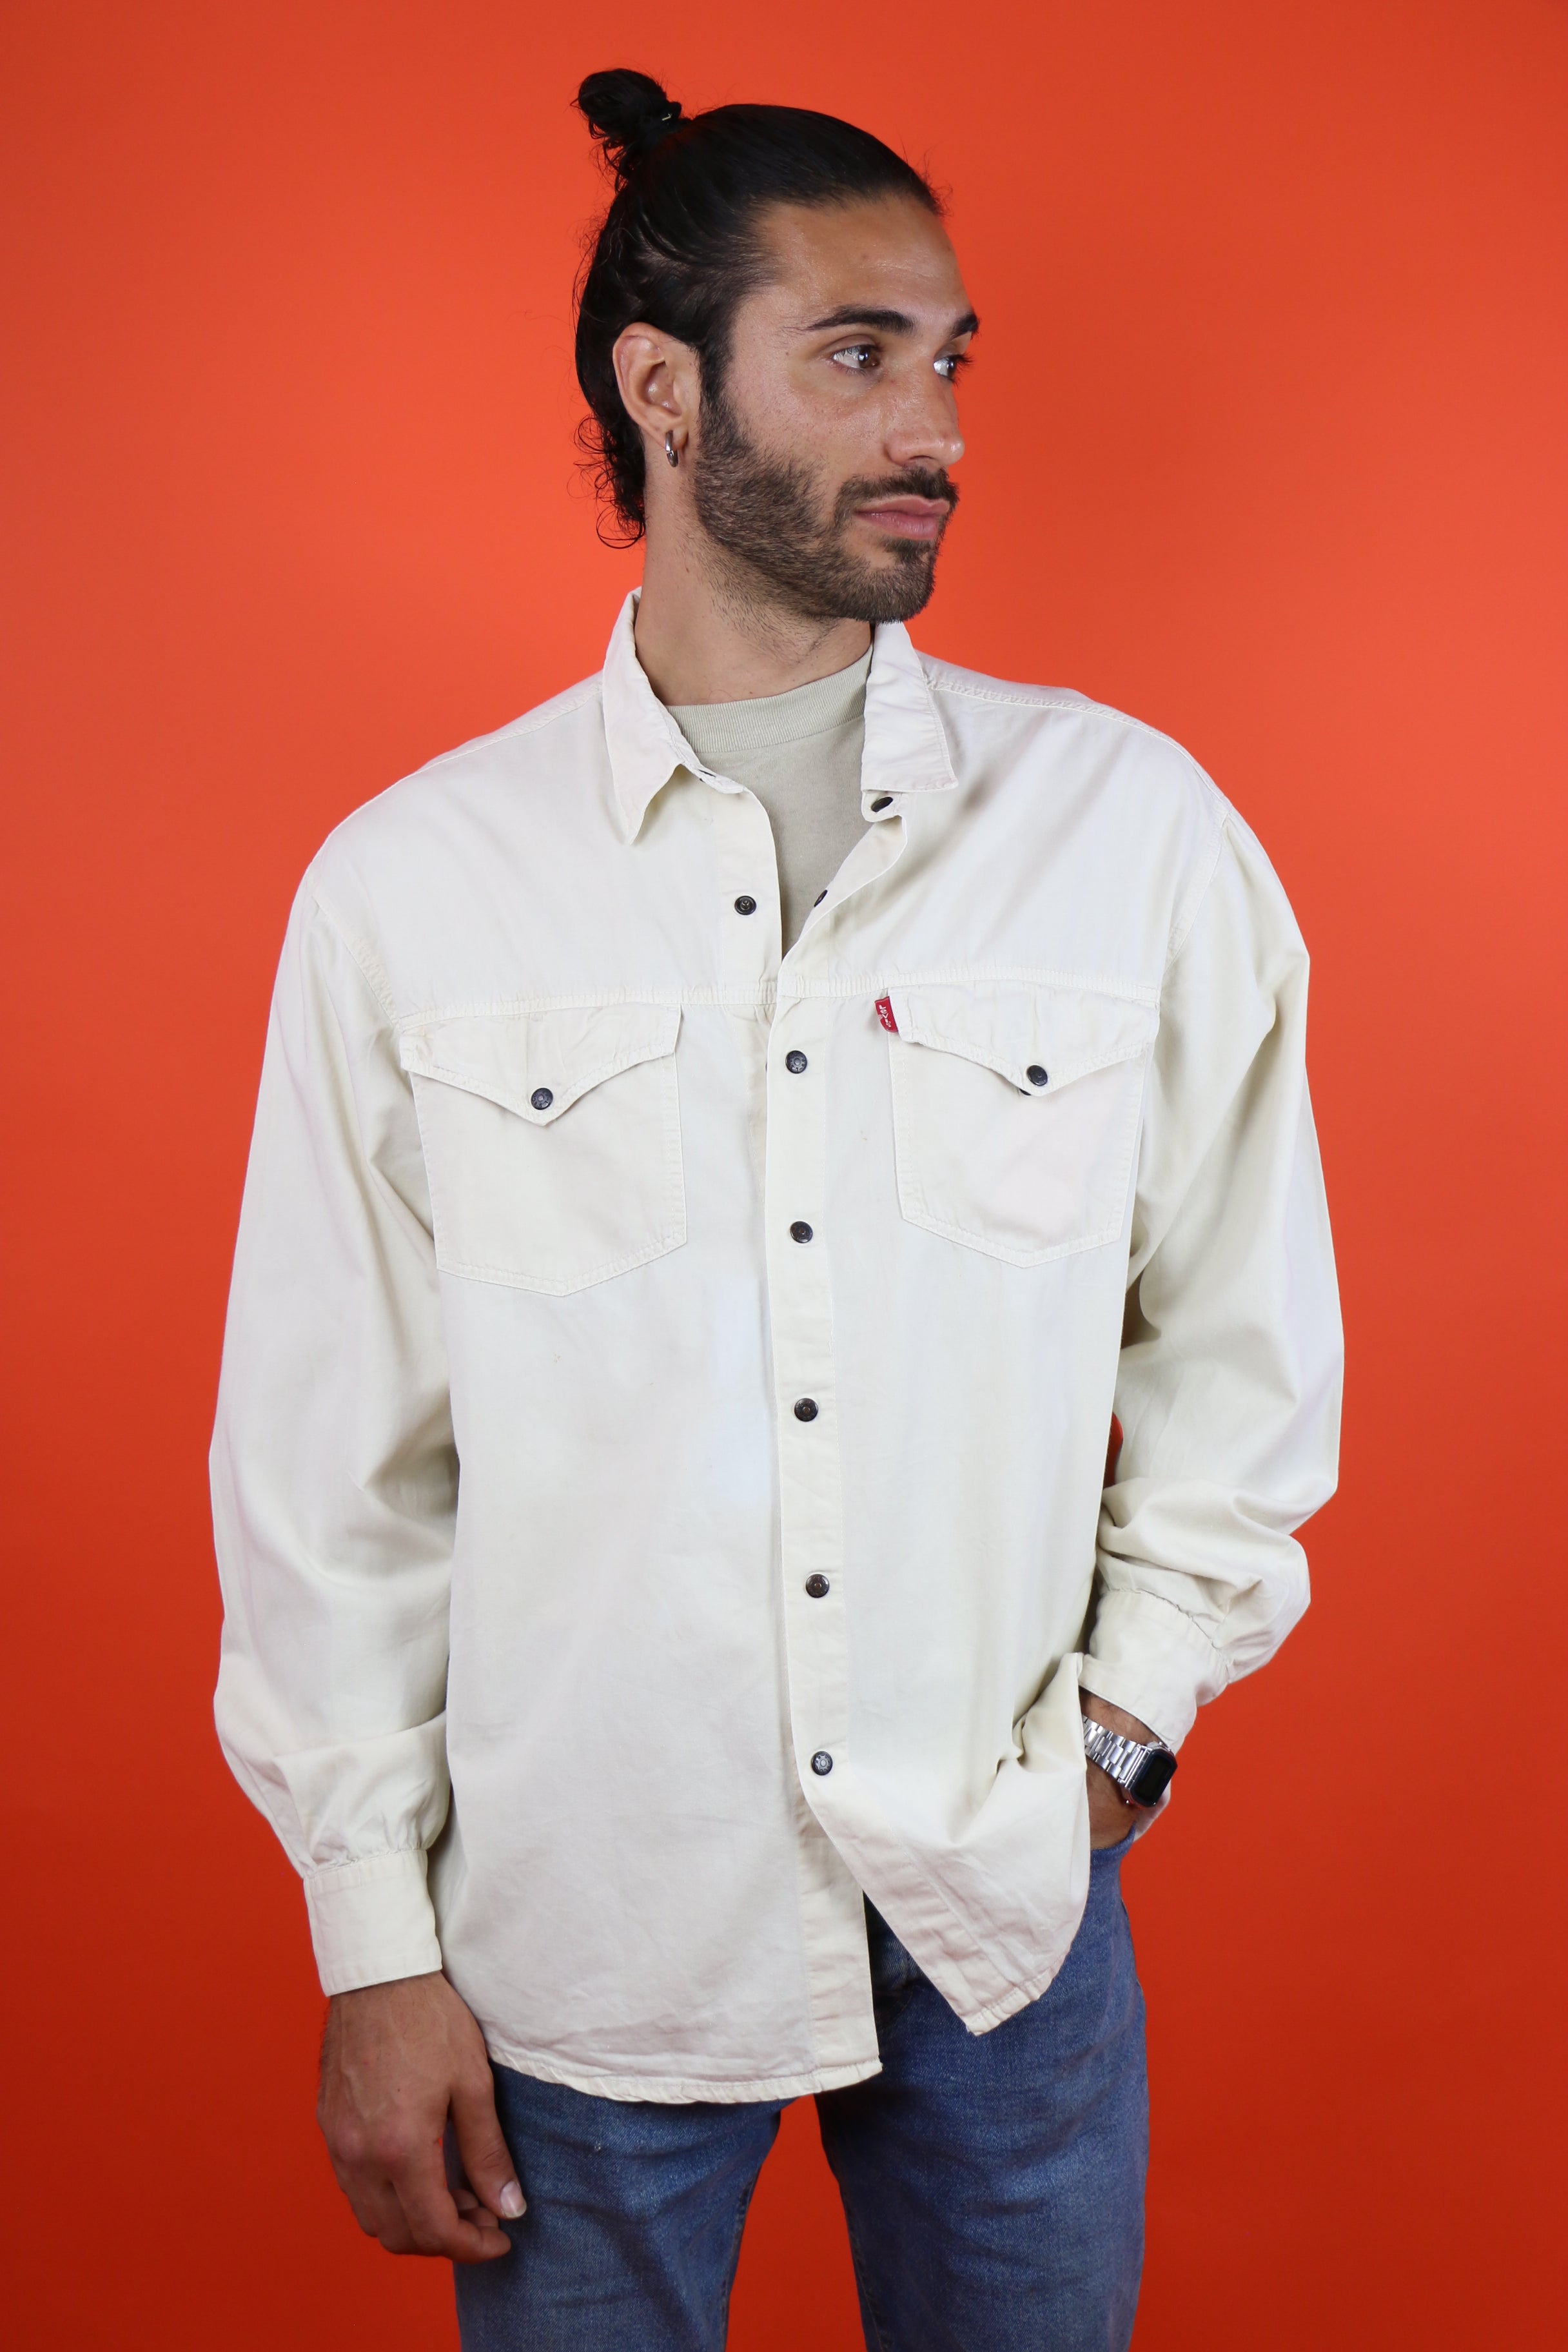 Buy Levis Denim Shirts Online At Best Price Offers In India